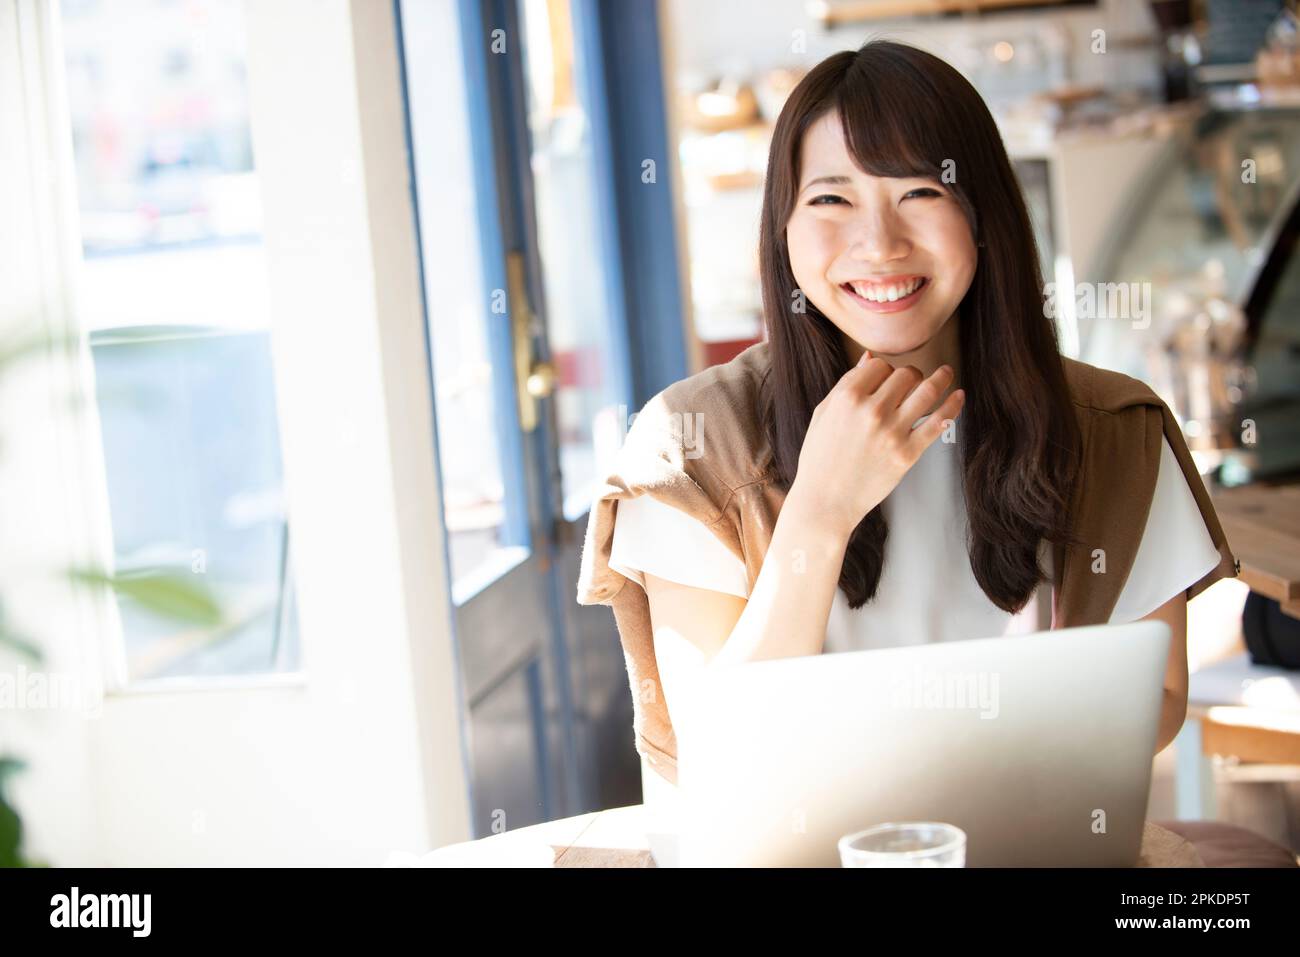 Woman laughing at a café Stock Photo